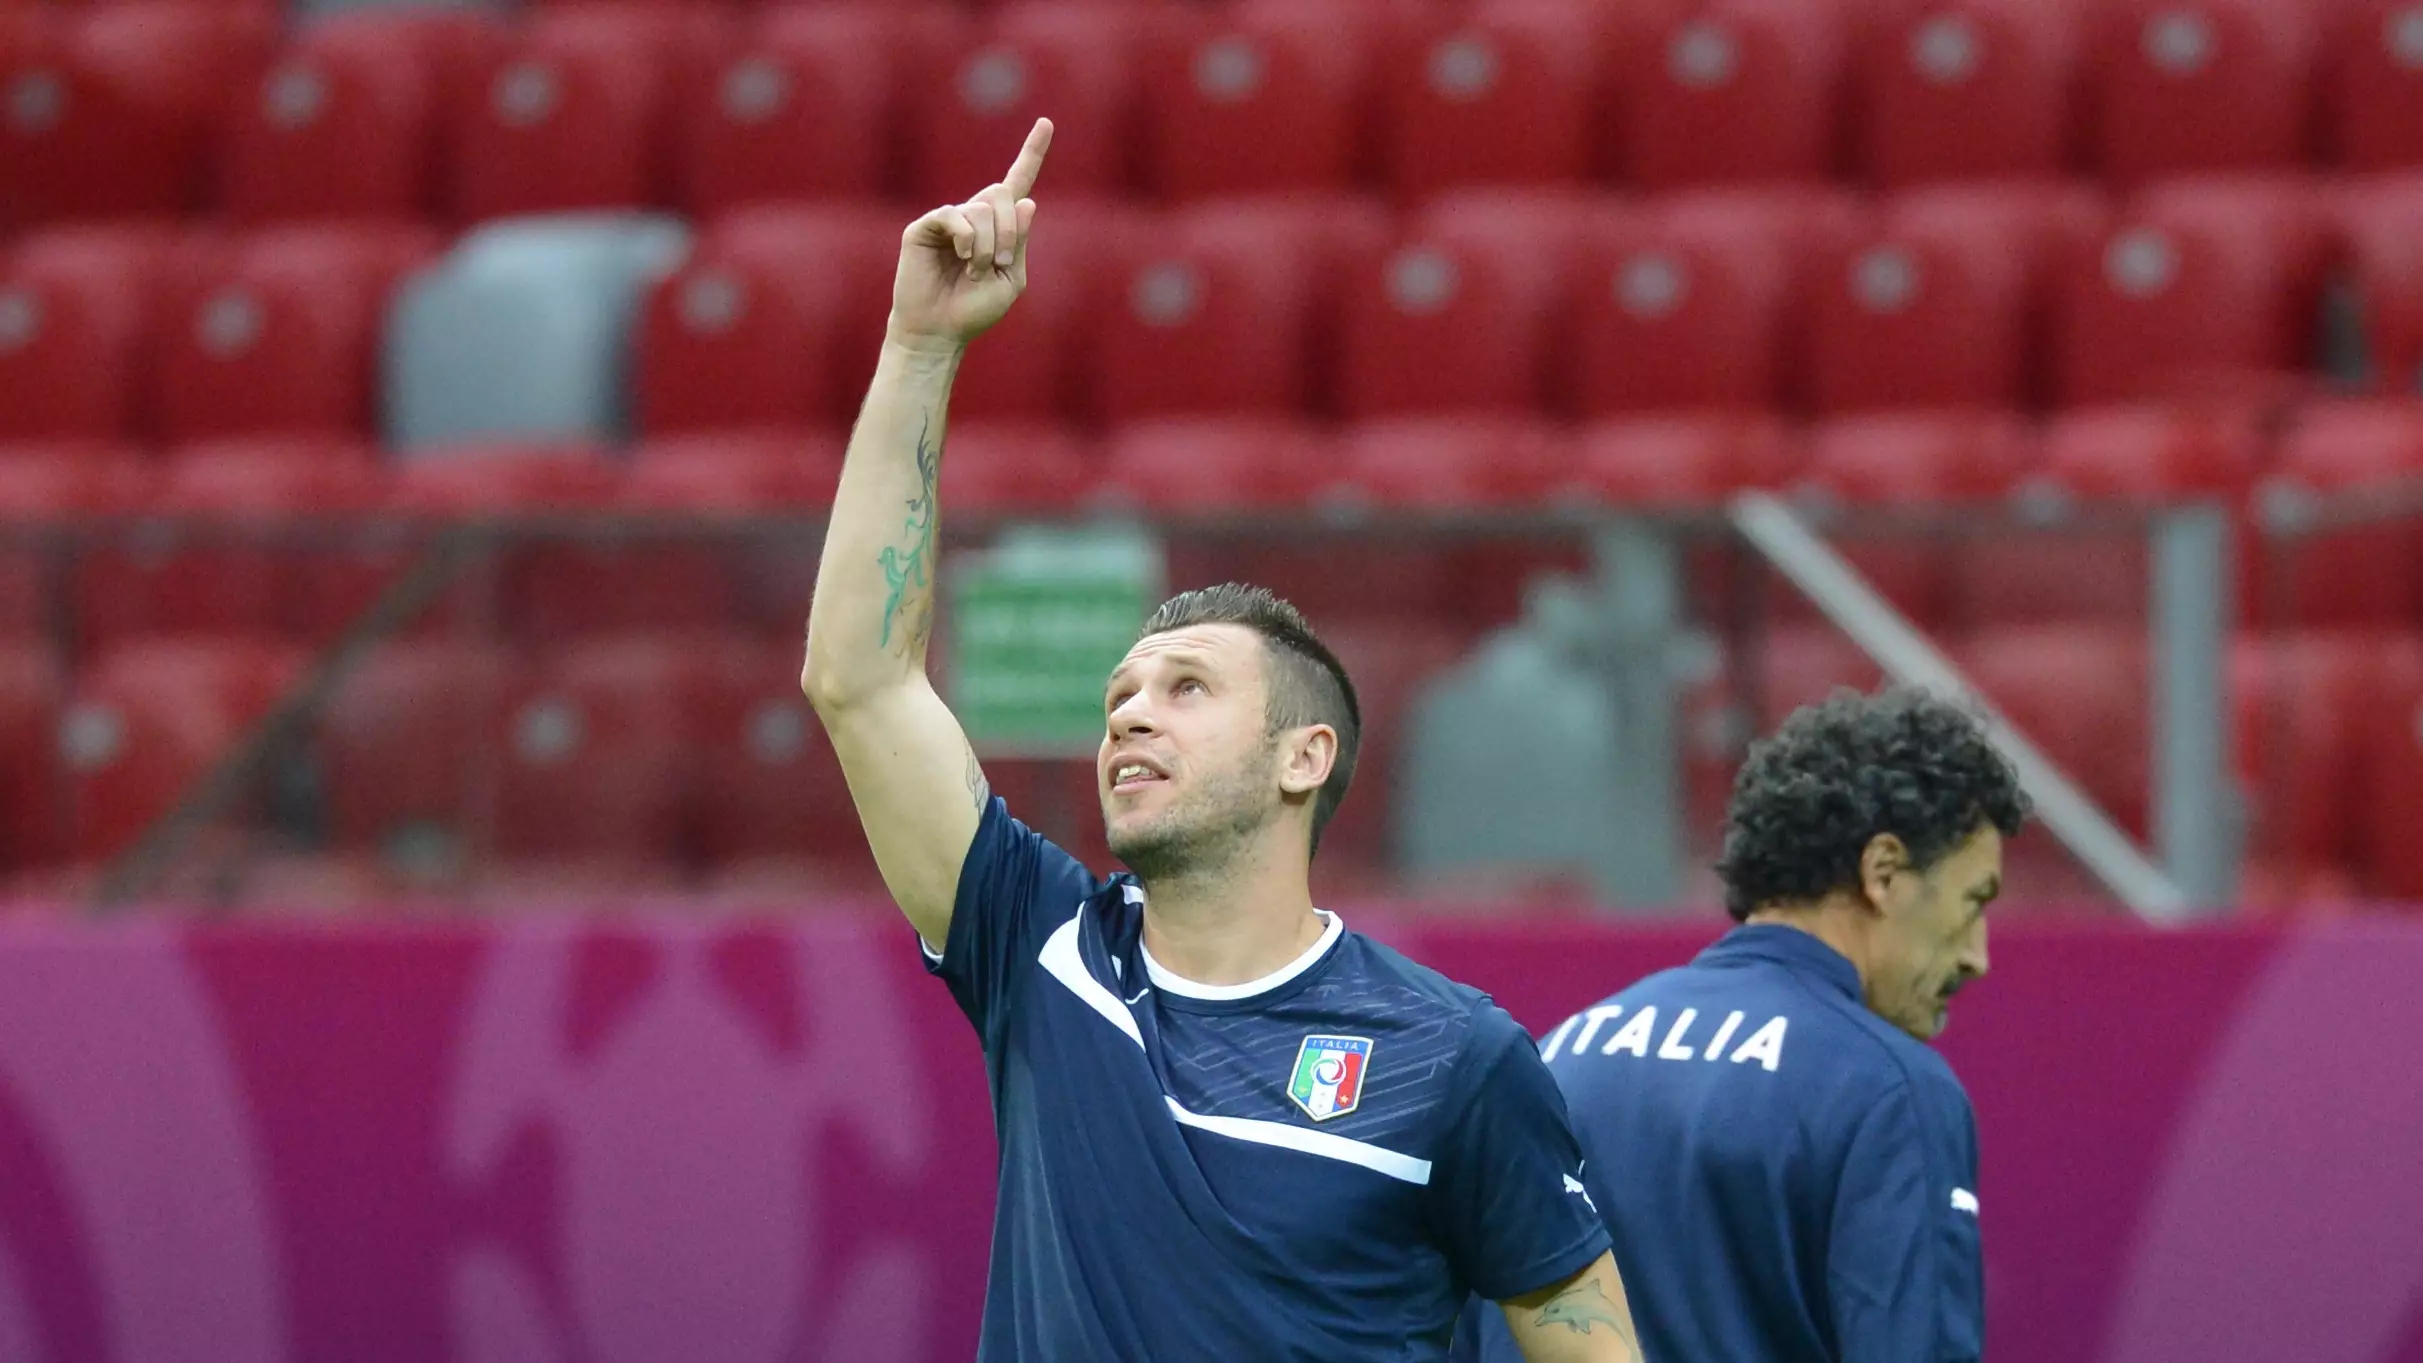 Antonio Cassano Is Back In Football, Four Hours After Retirement